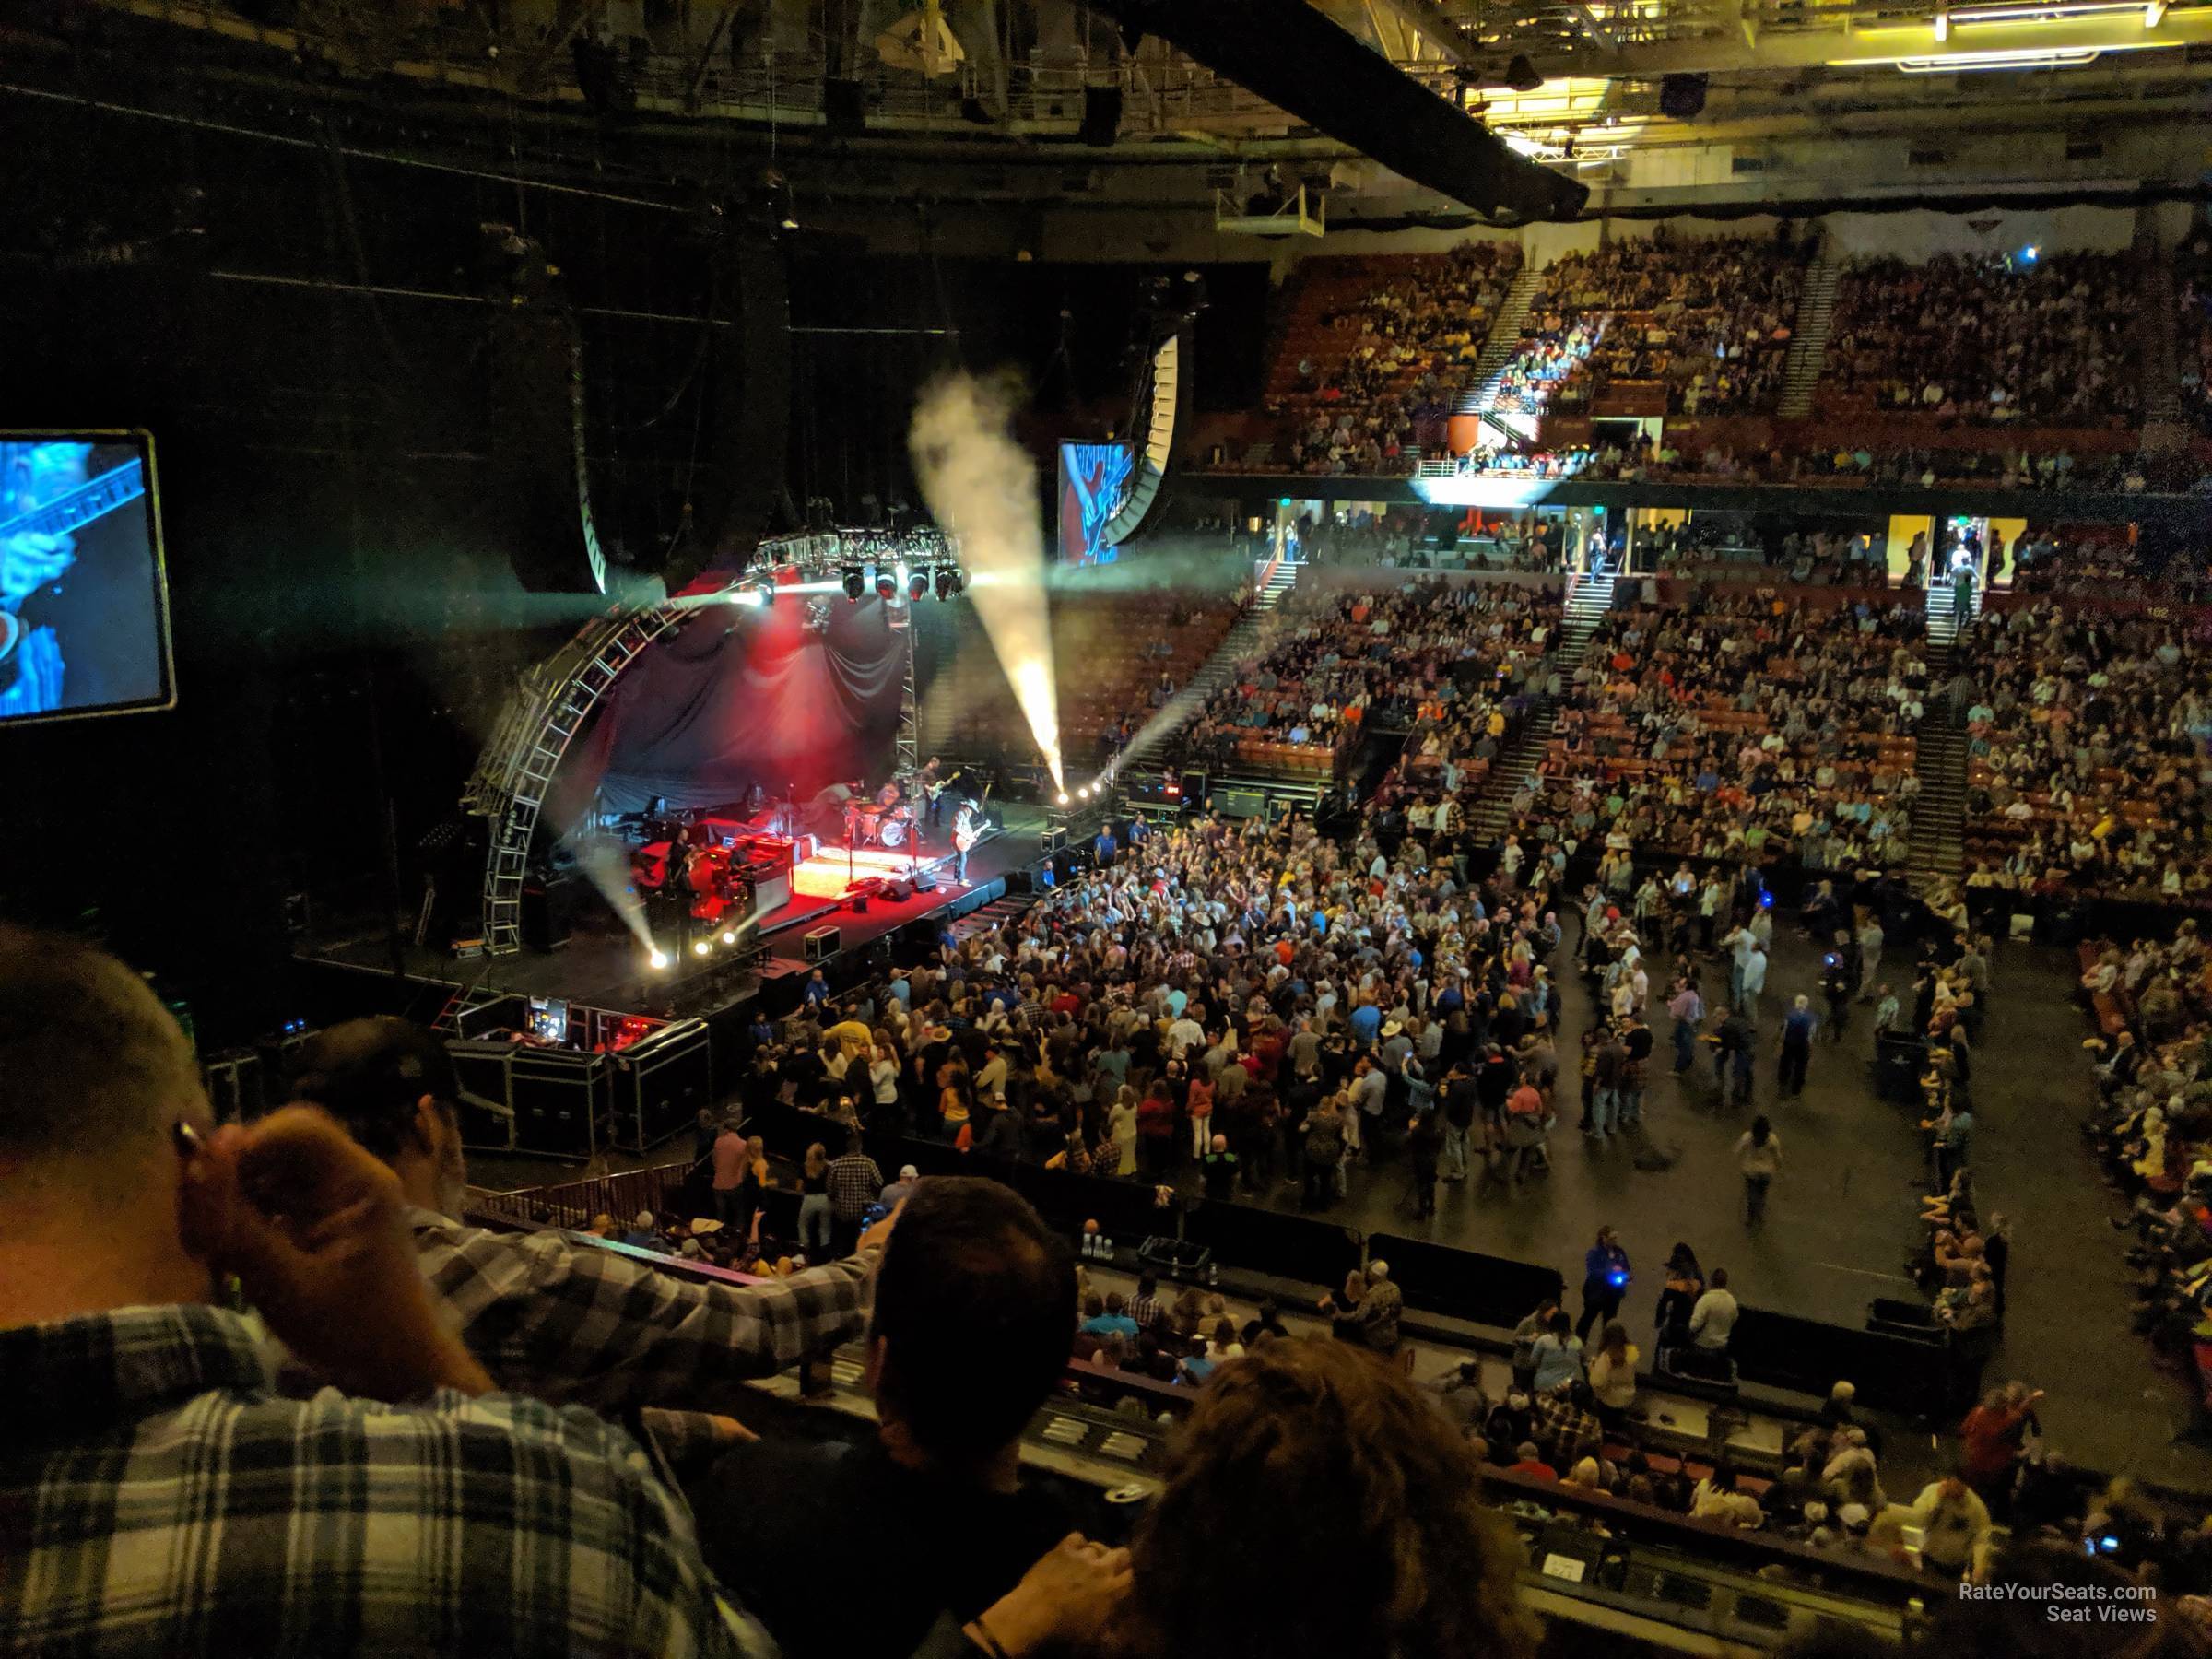 section 220, row b seat view  for concert - bon secours wellness arena